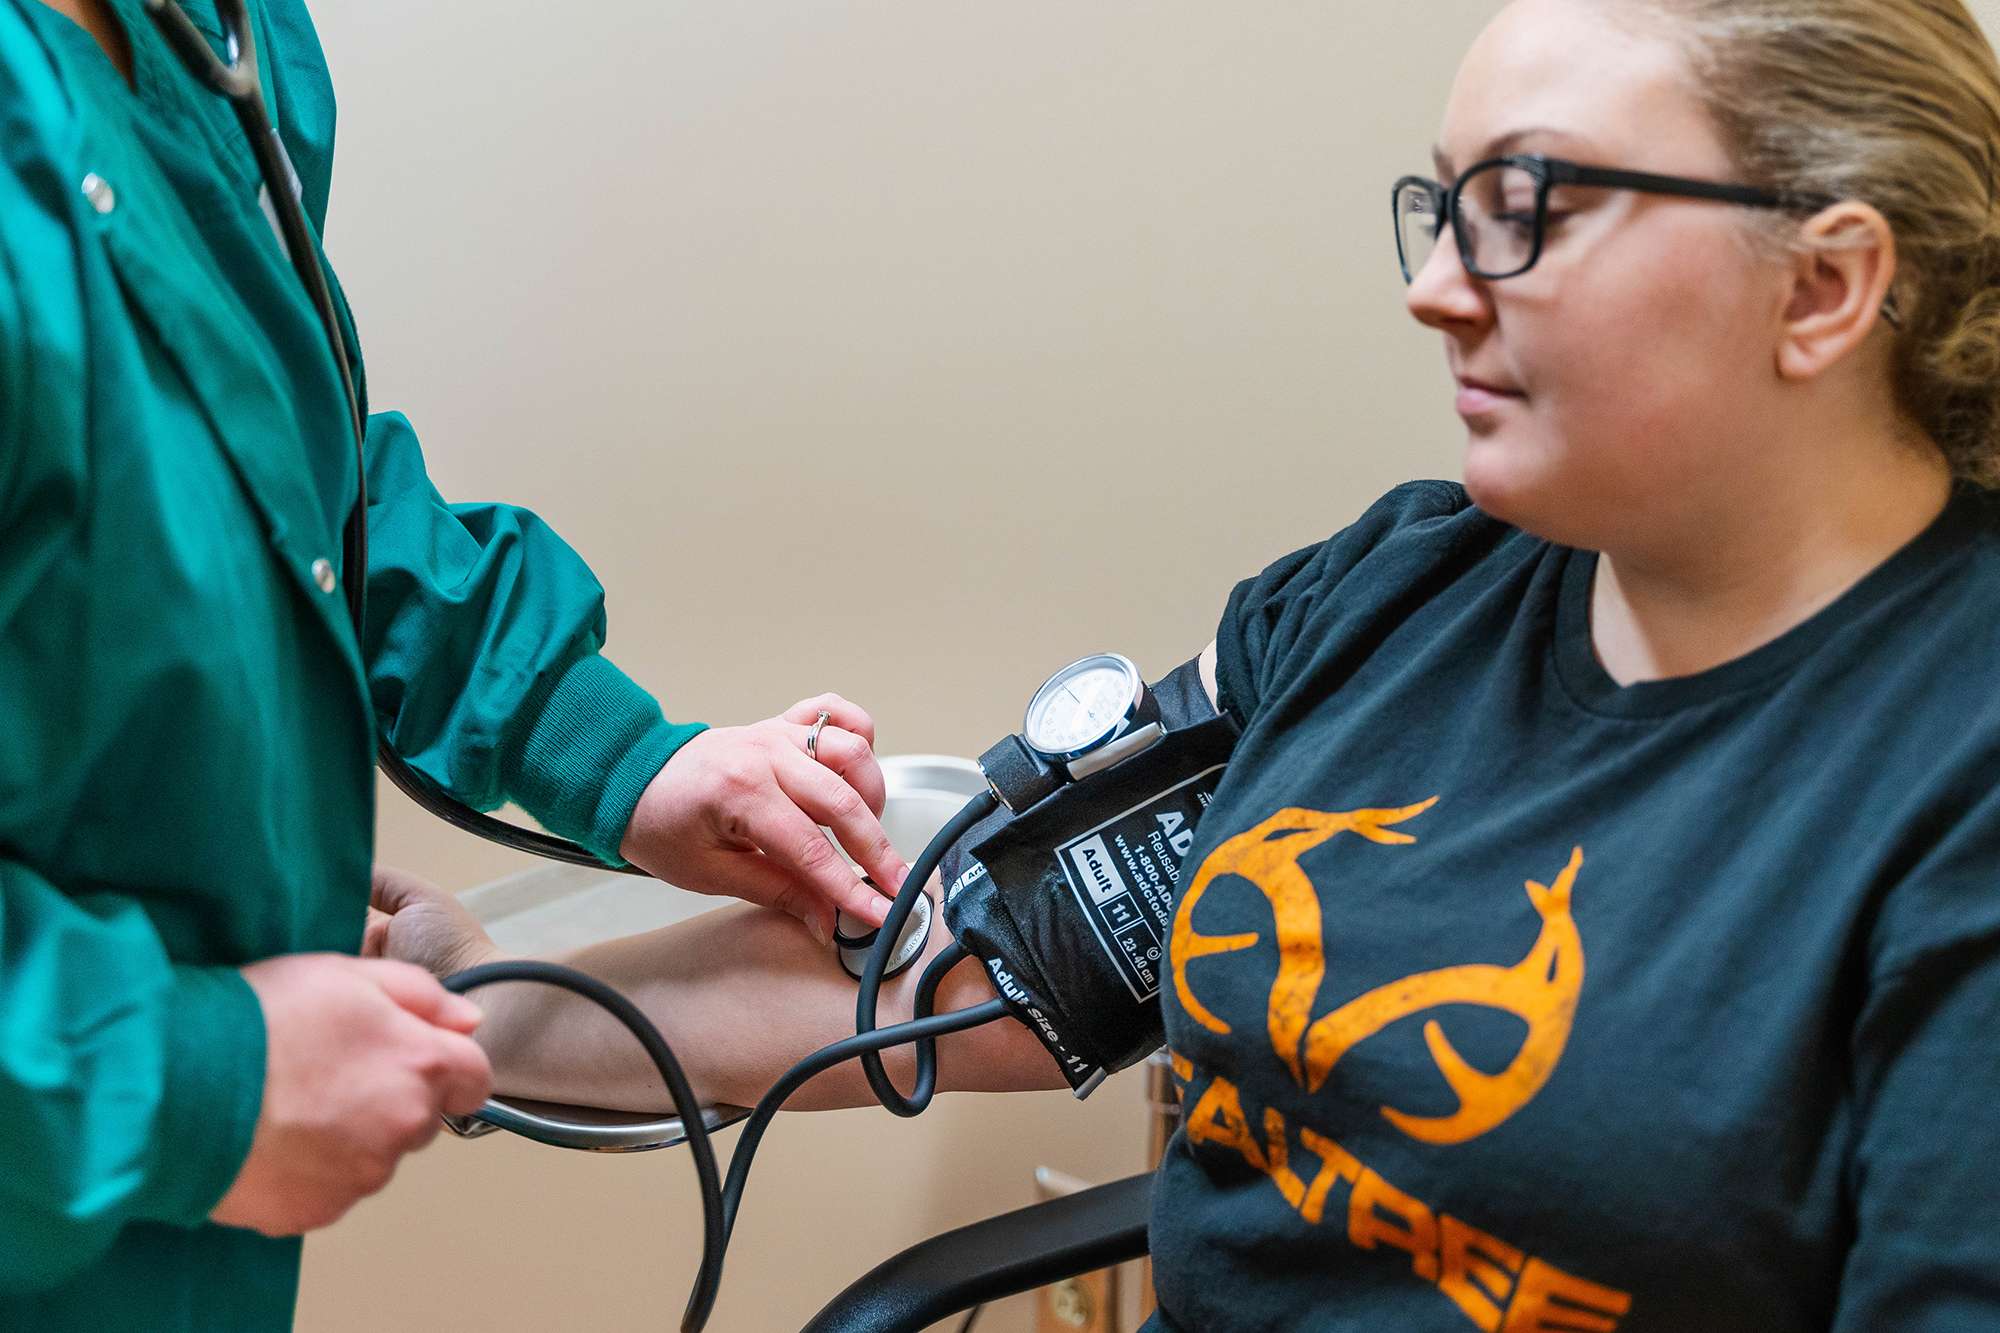 A Medical Assistant is checking the pulse and blood pressure of a patient.